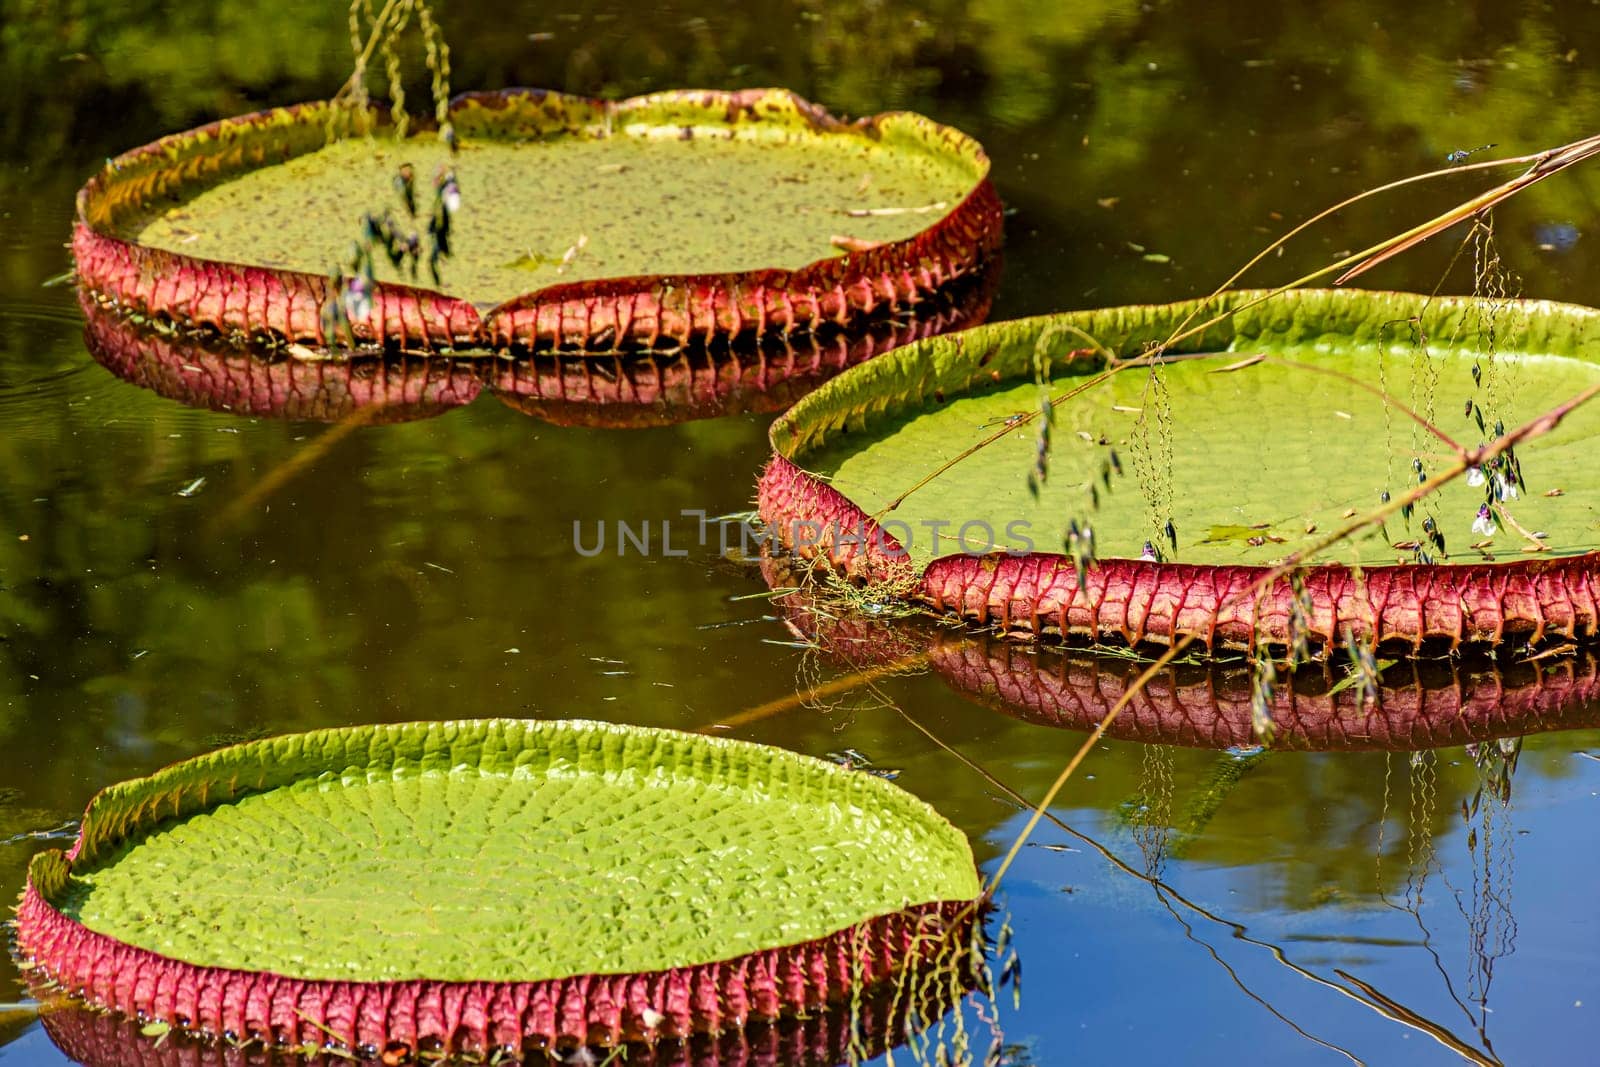 Water Lily typical of the Amazon with its characteristic circular shape by Fred_Pinheiro